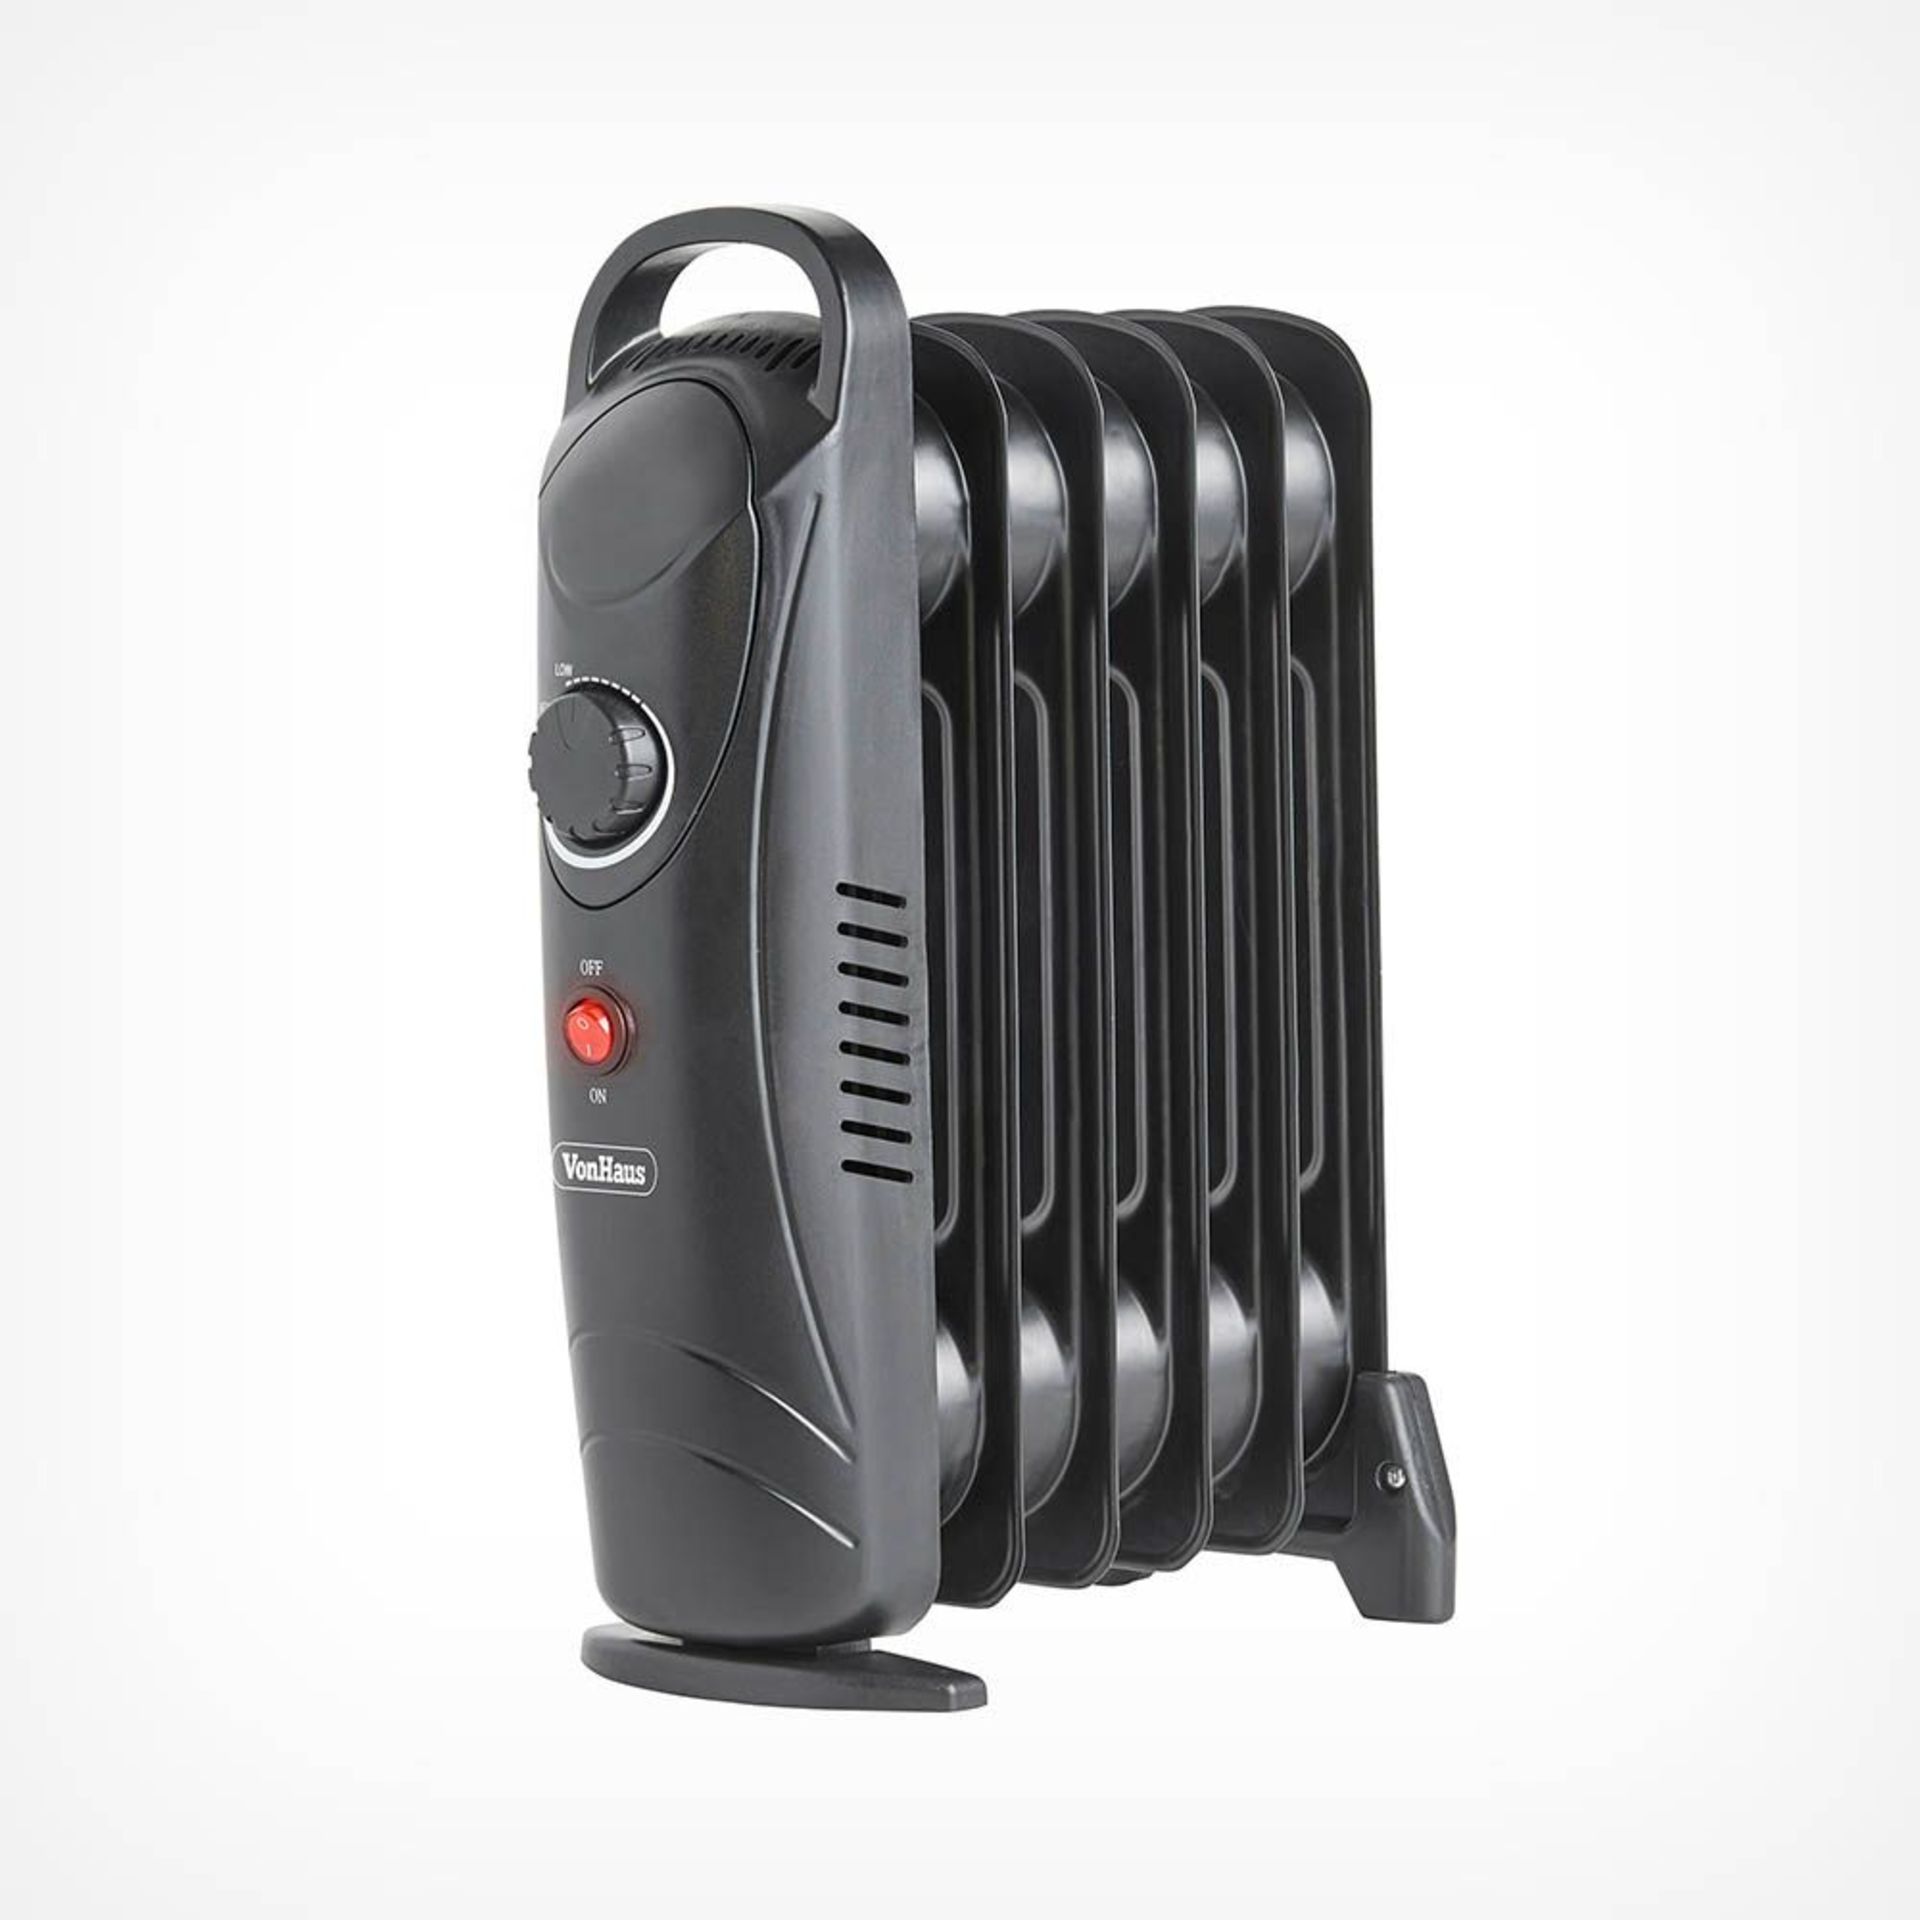 (H189) 6 Fin 800W Oil Filled Radiator - Black Compact yet powerful 800W radiator with 6 oil-fi...( - Image 2 of 3